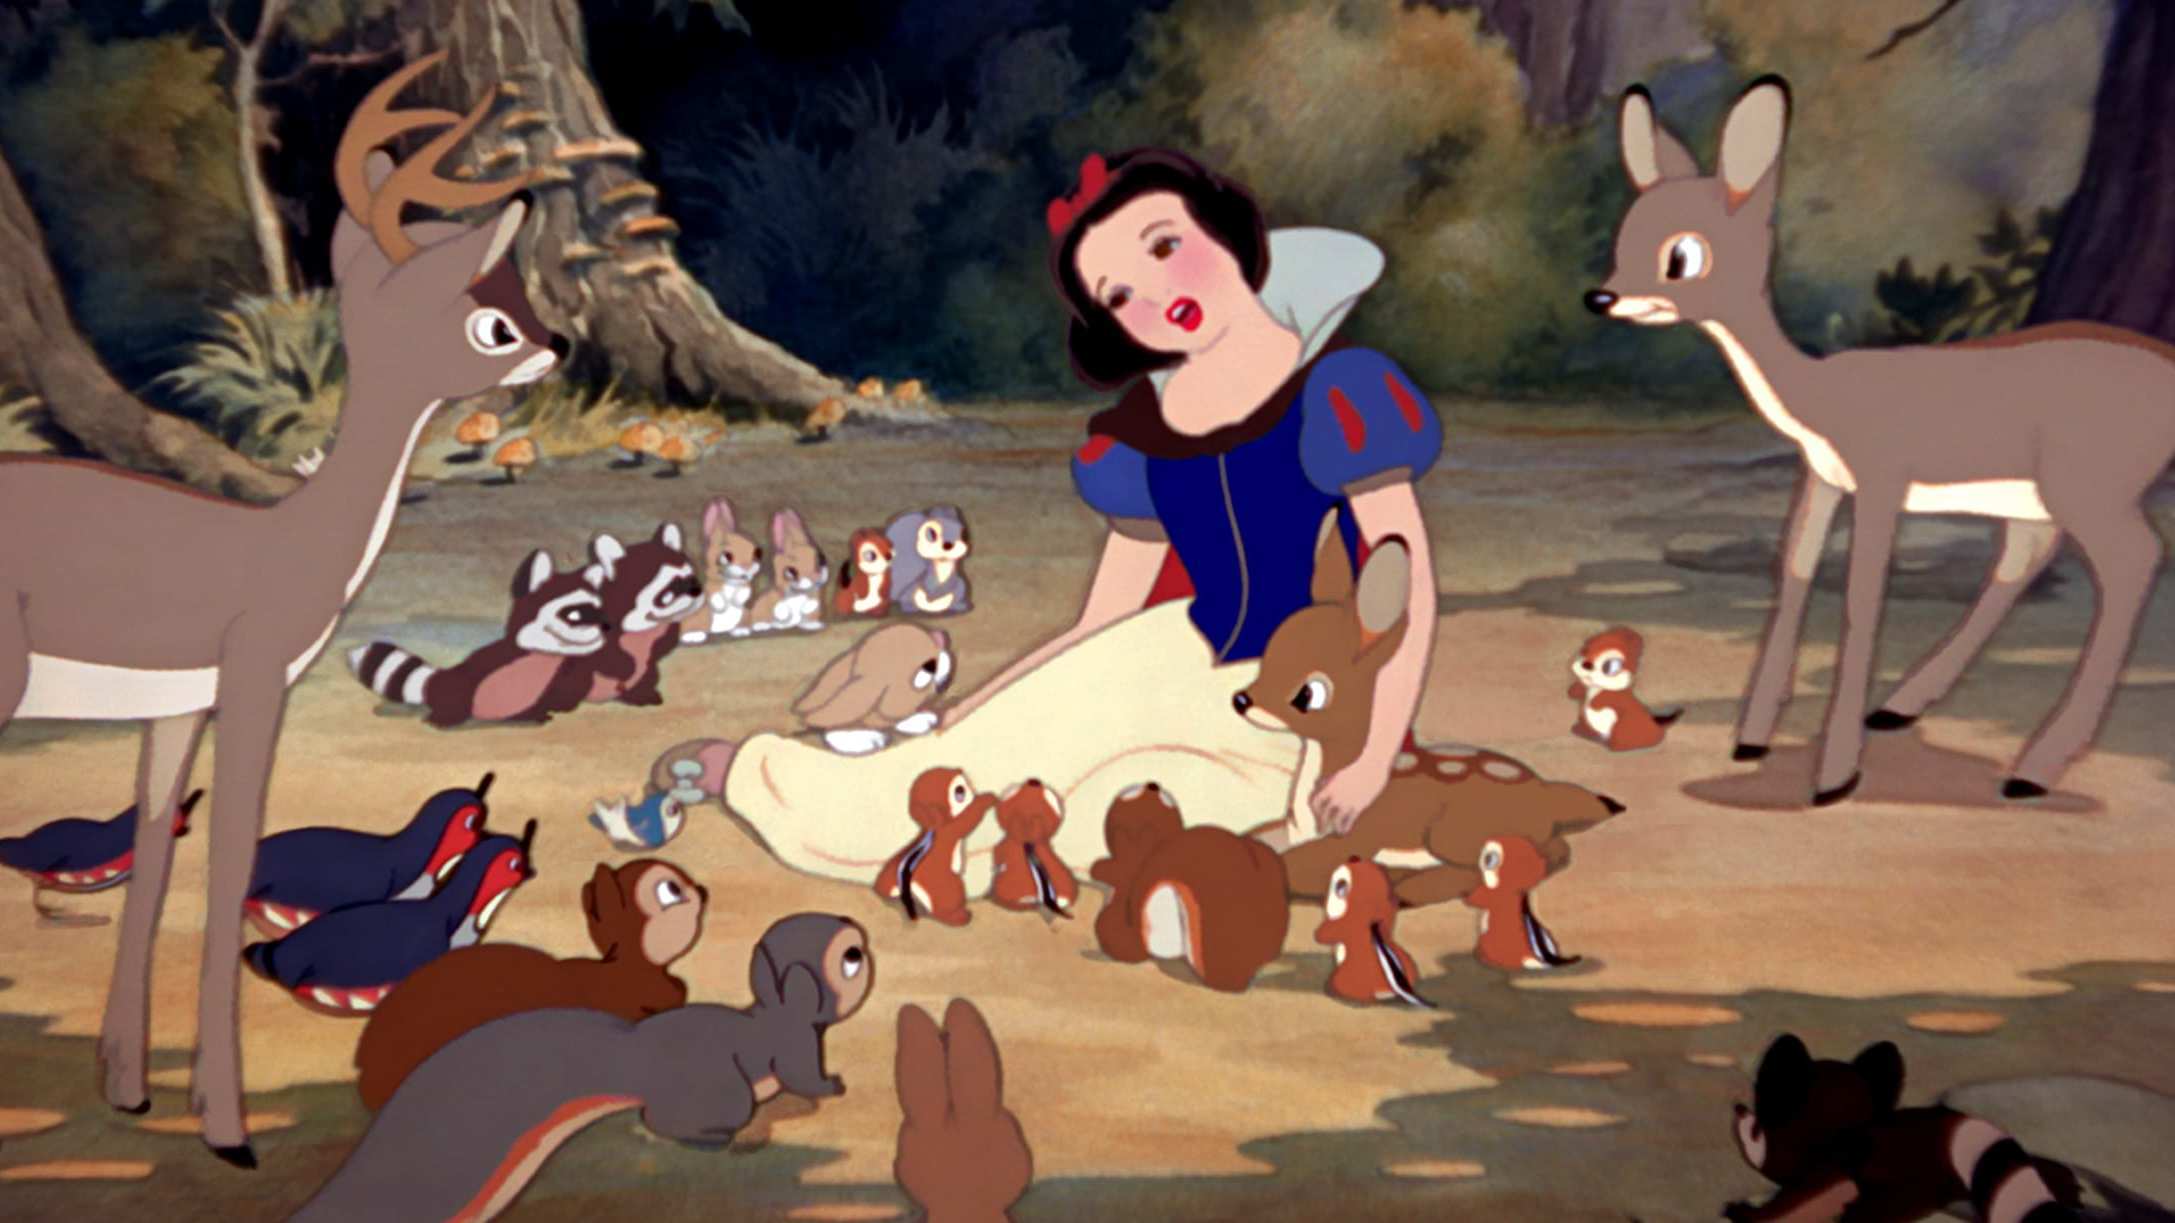 Snow White spreading joy and positivity with her song.